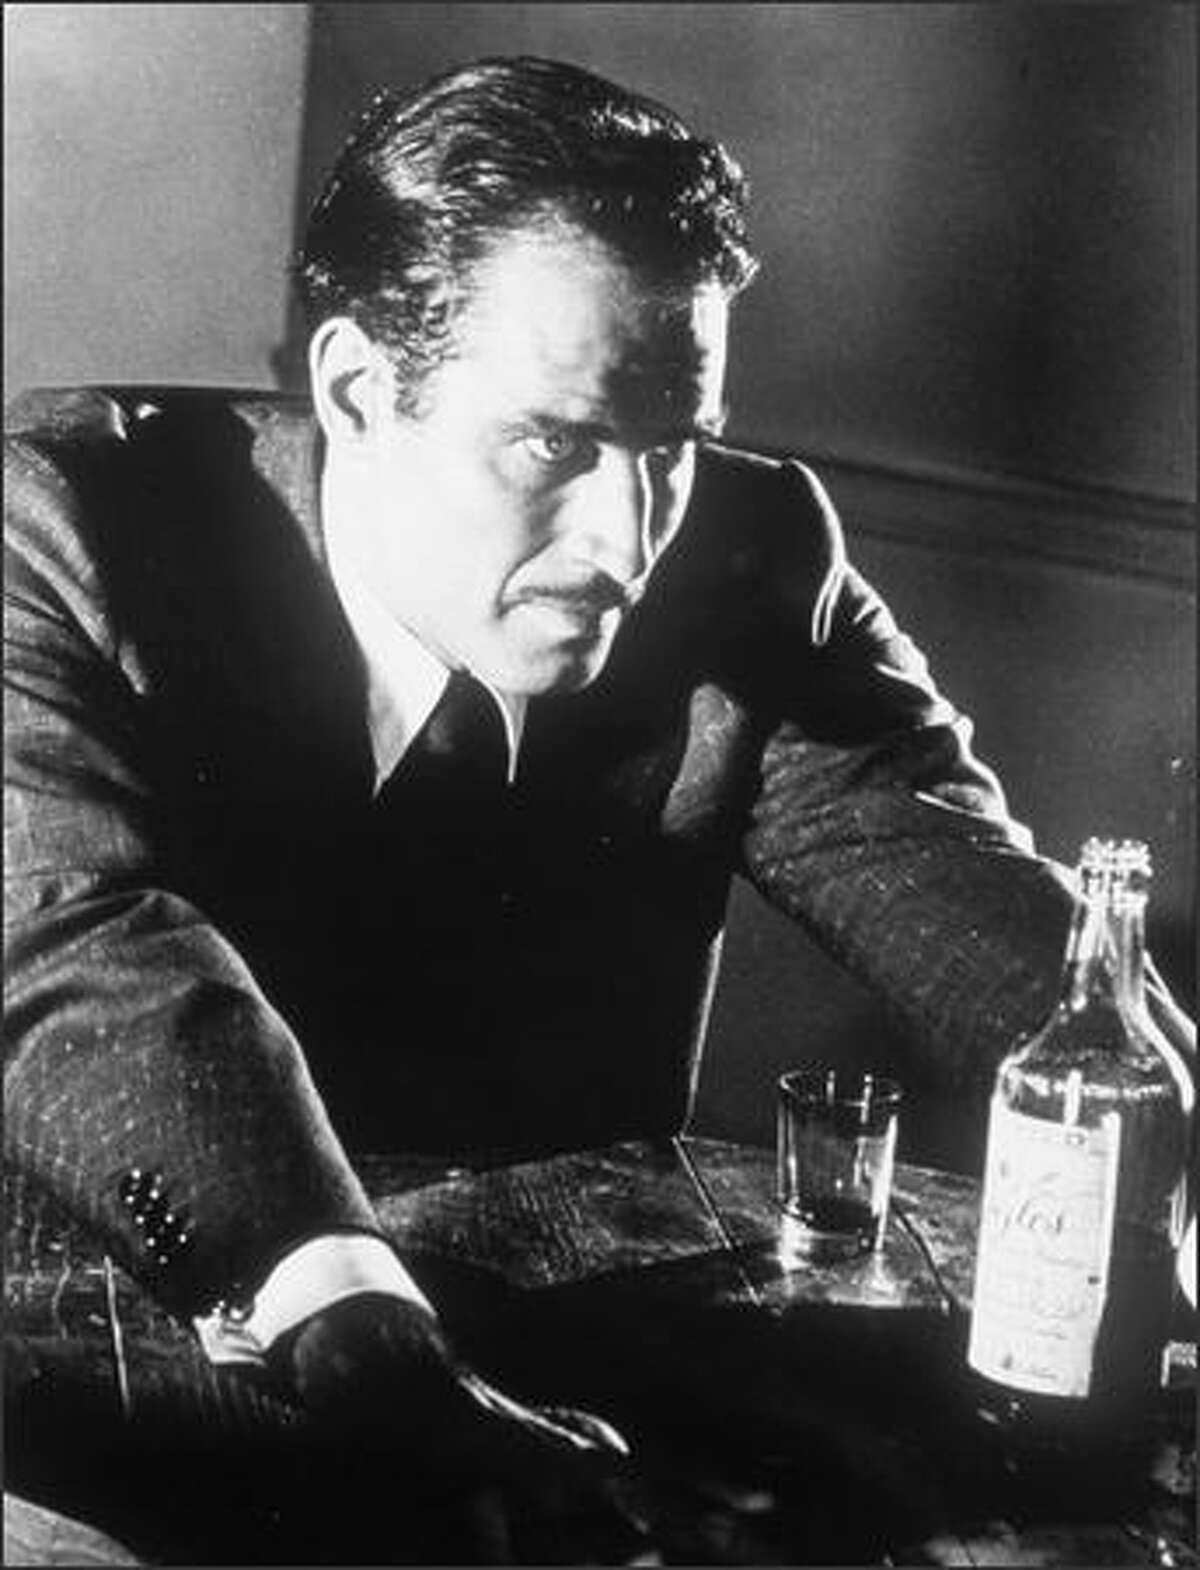 Miguel "Mike" Vargas (Charlton Heston) finds himself embroiled in an international murder investigation in Orson Welles' "Touch Of Evil." The 1957 classic was restored and released on DVD and VHS by Universal Studios Home Video in 2000. (Photo by Universal Studios/Newsmakers)